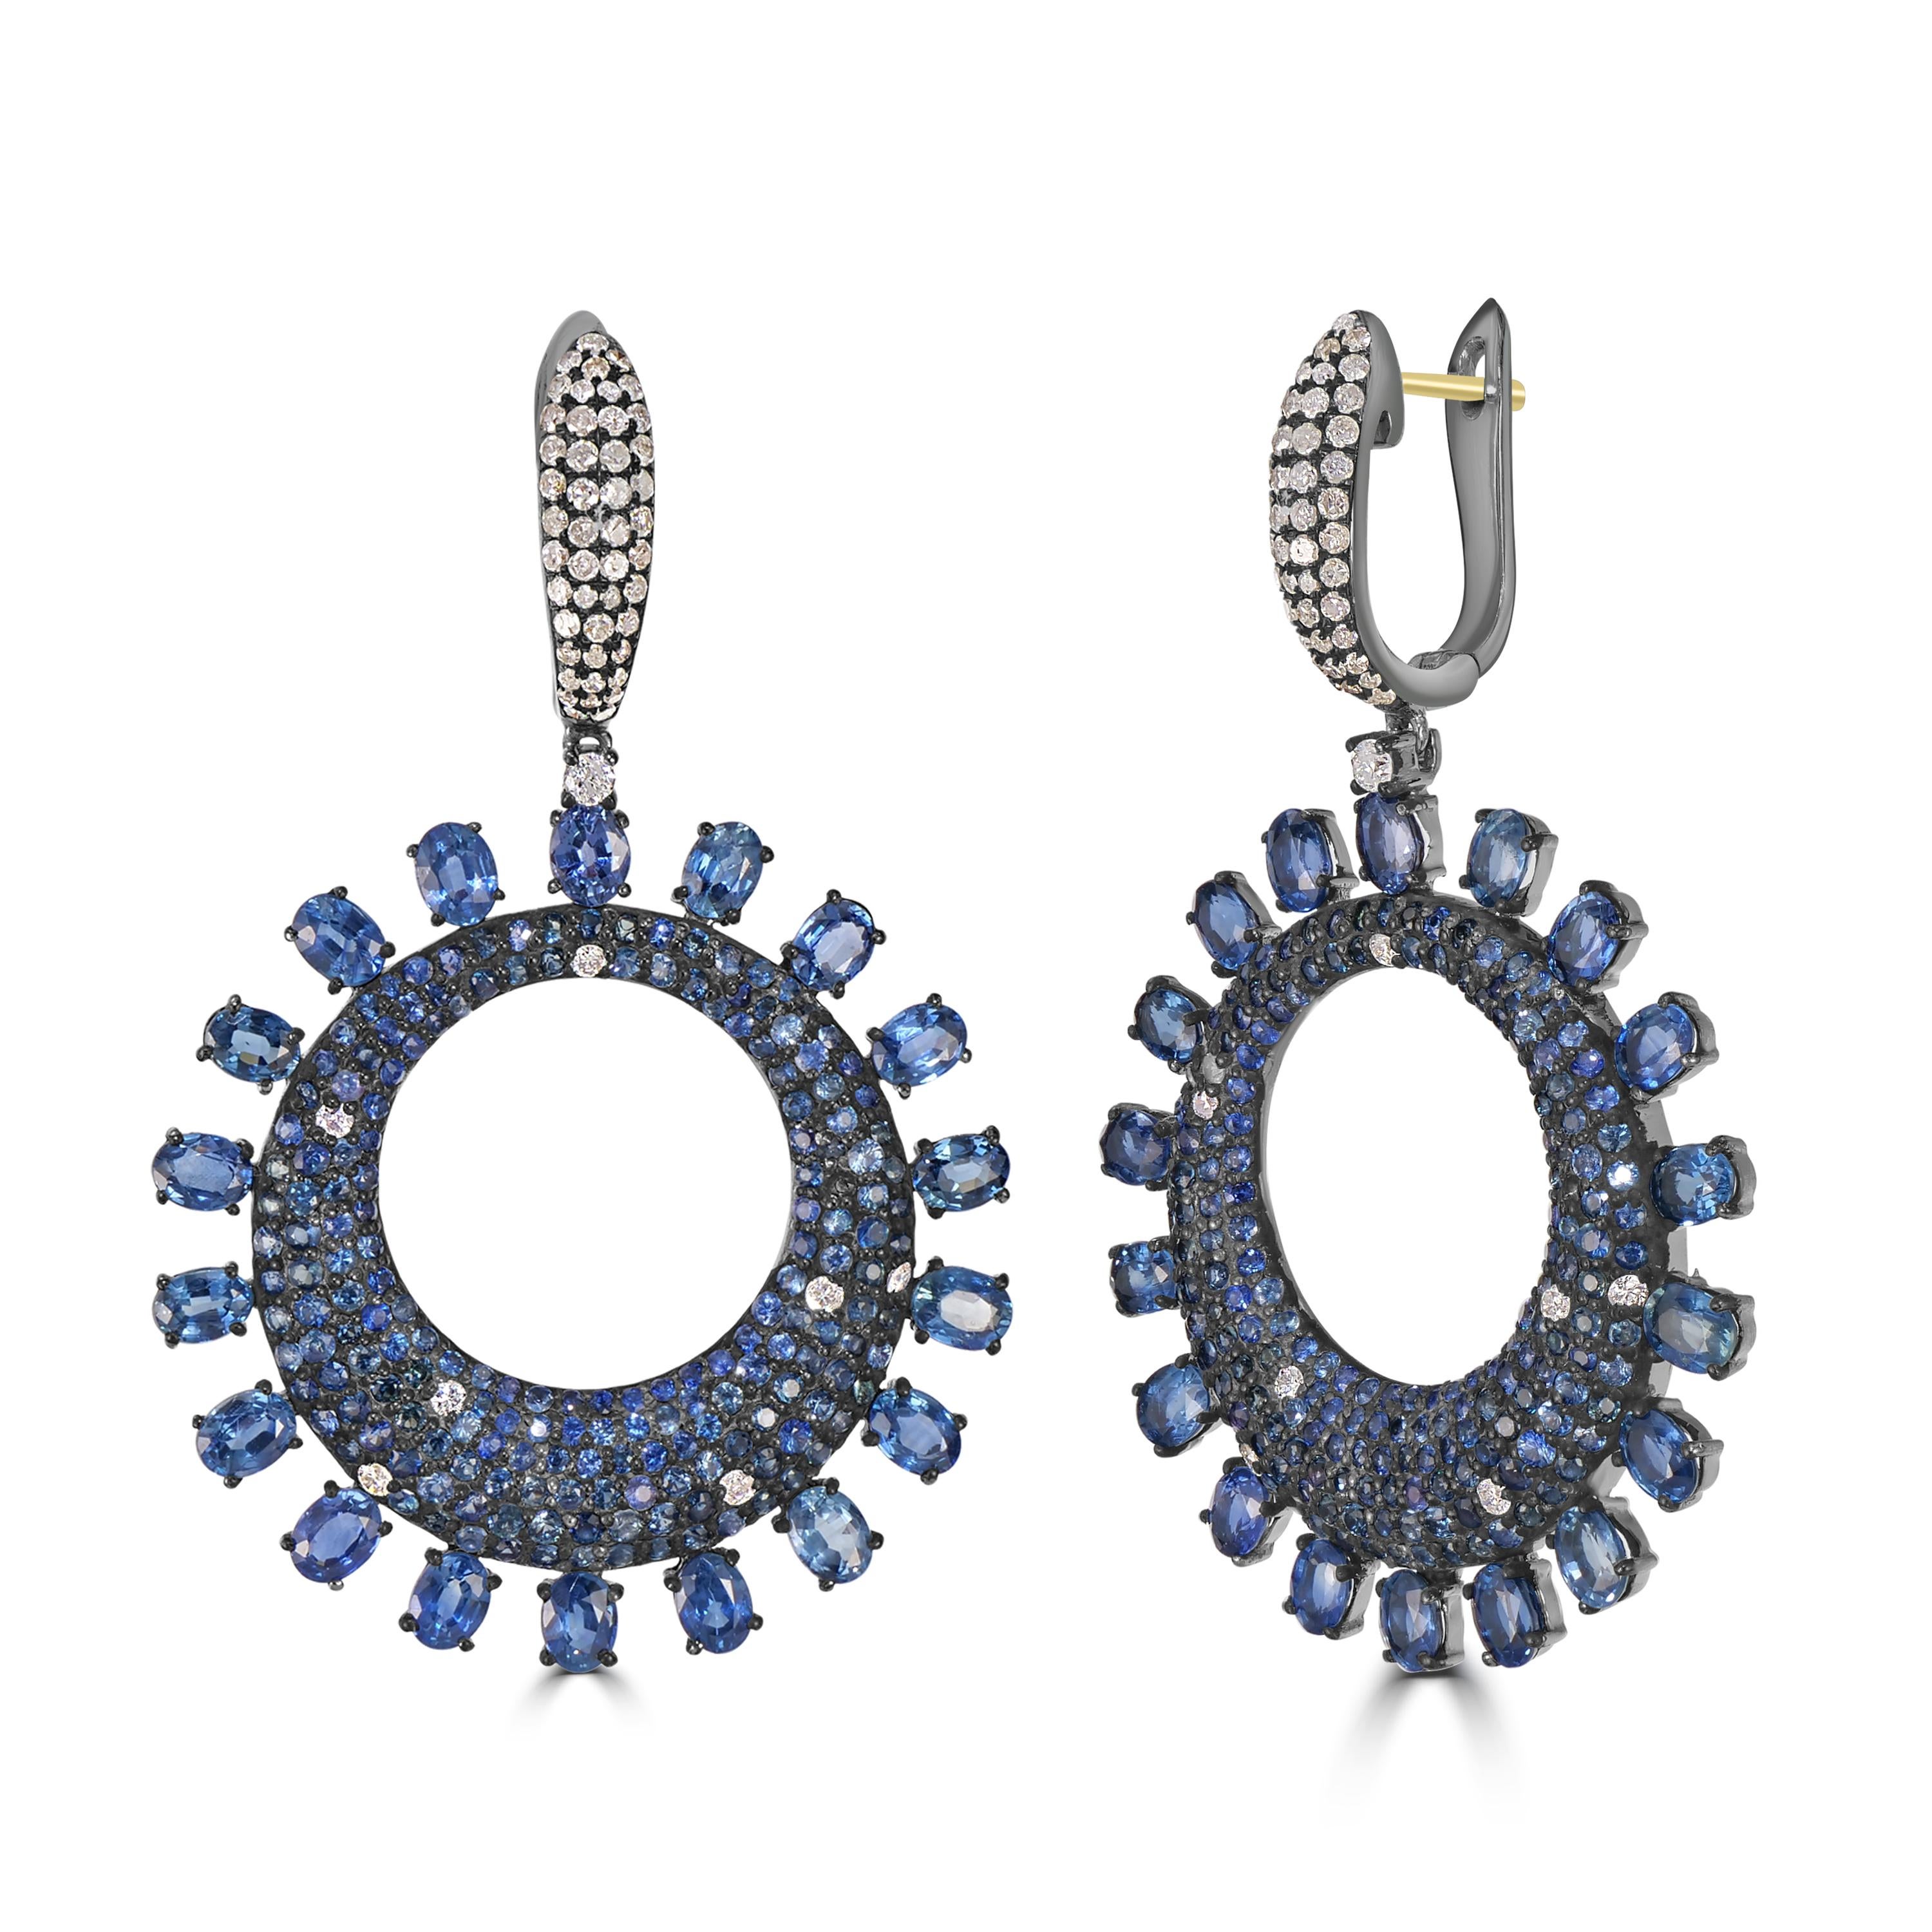 Behold the resplendent Victorian 14.09 Cttw. Blue Sapphire and Diamond Dangle Earrings—a testament to the exquisite beauty of blue sapphires and the timeless allure of circular design.

At the heart of these earrings is a circular drop, a